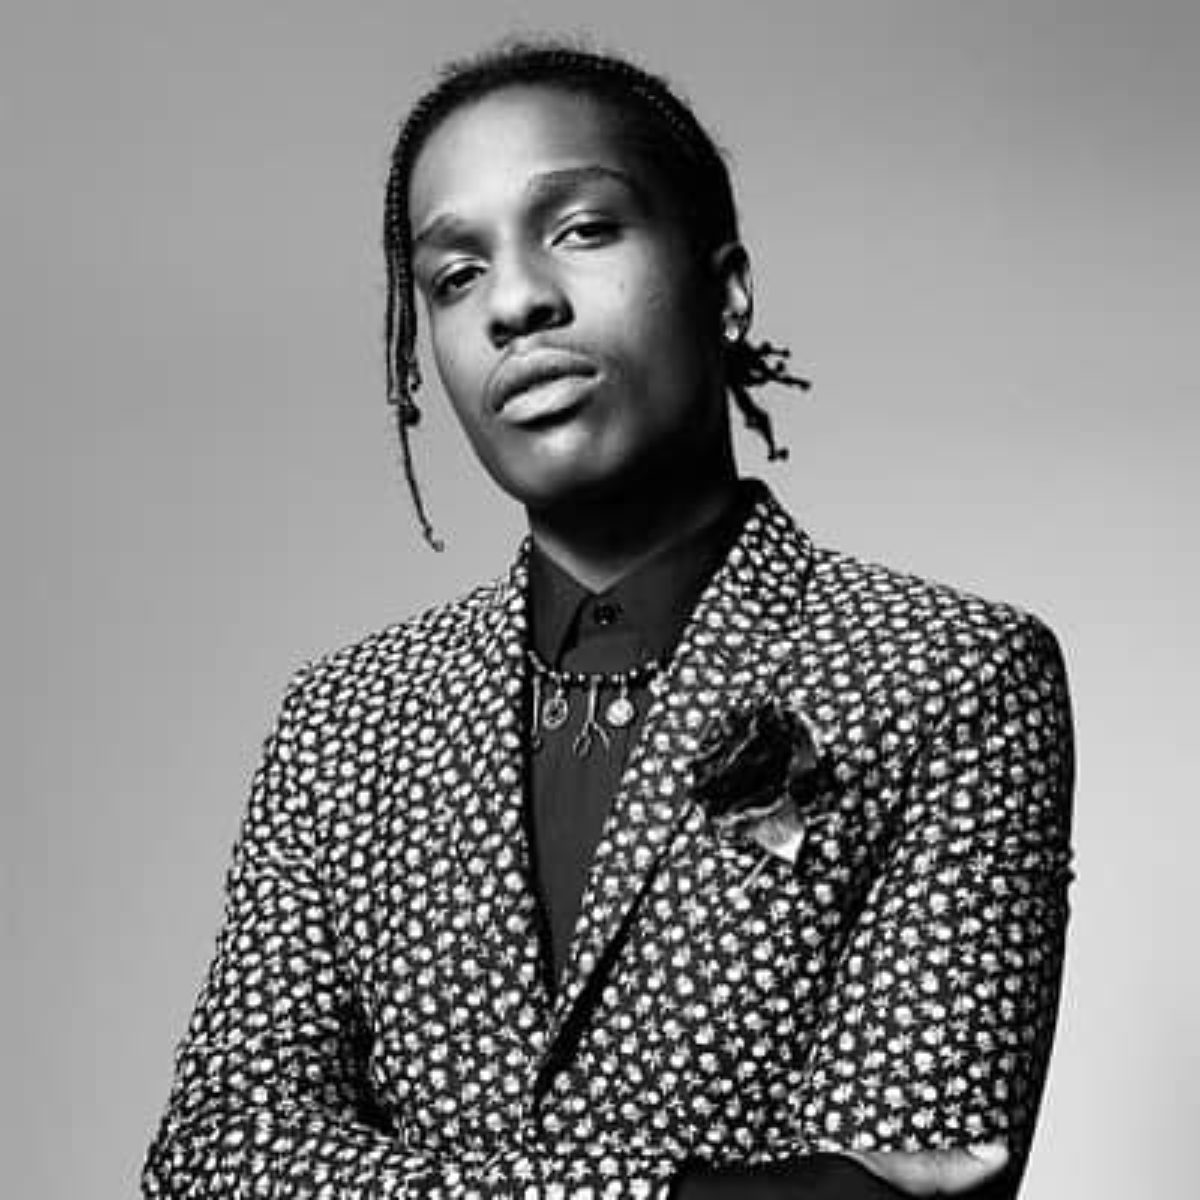 ASAP Rocky- Bio, Age, Net Worth, Height, In Relation, Facts